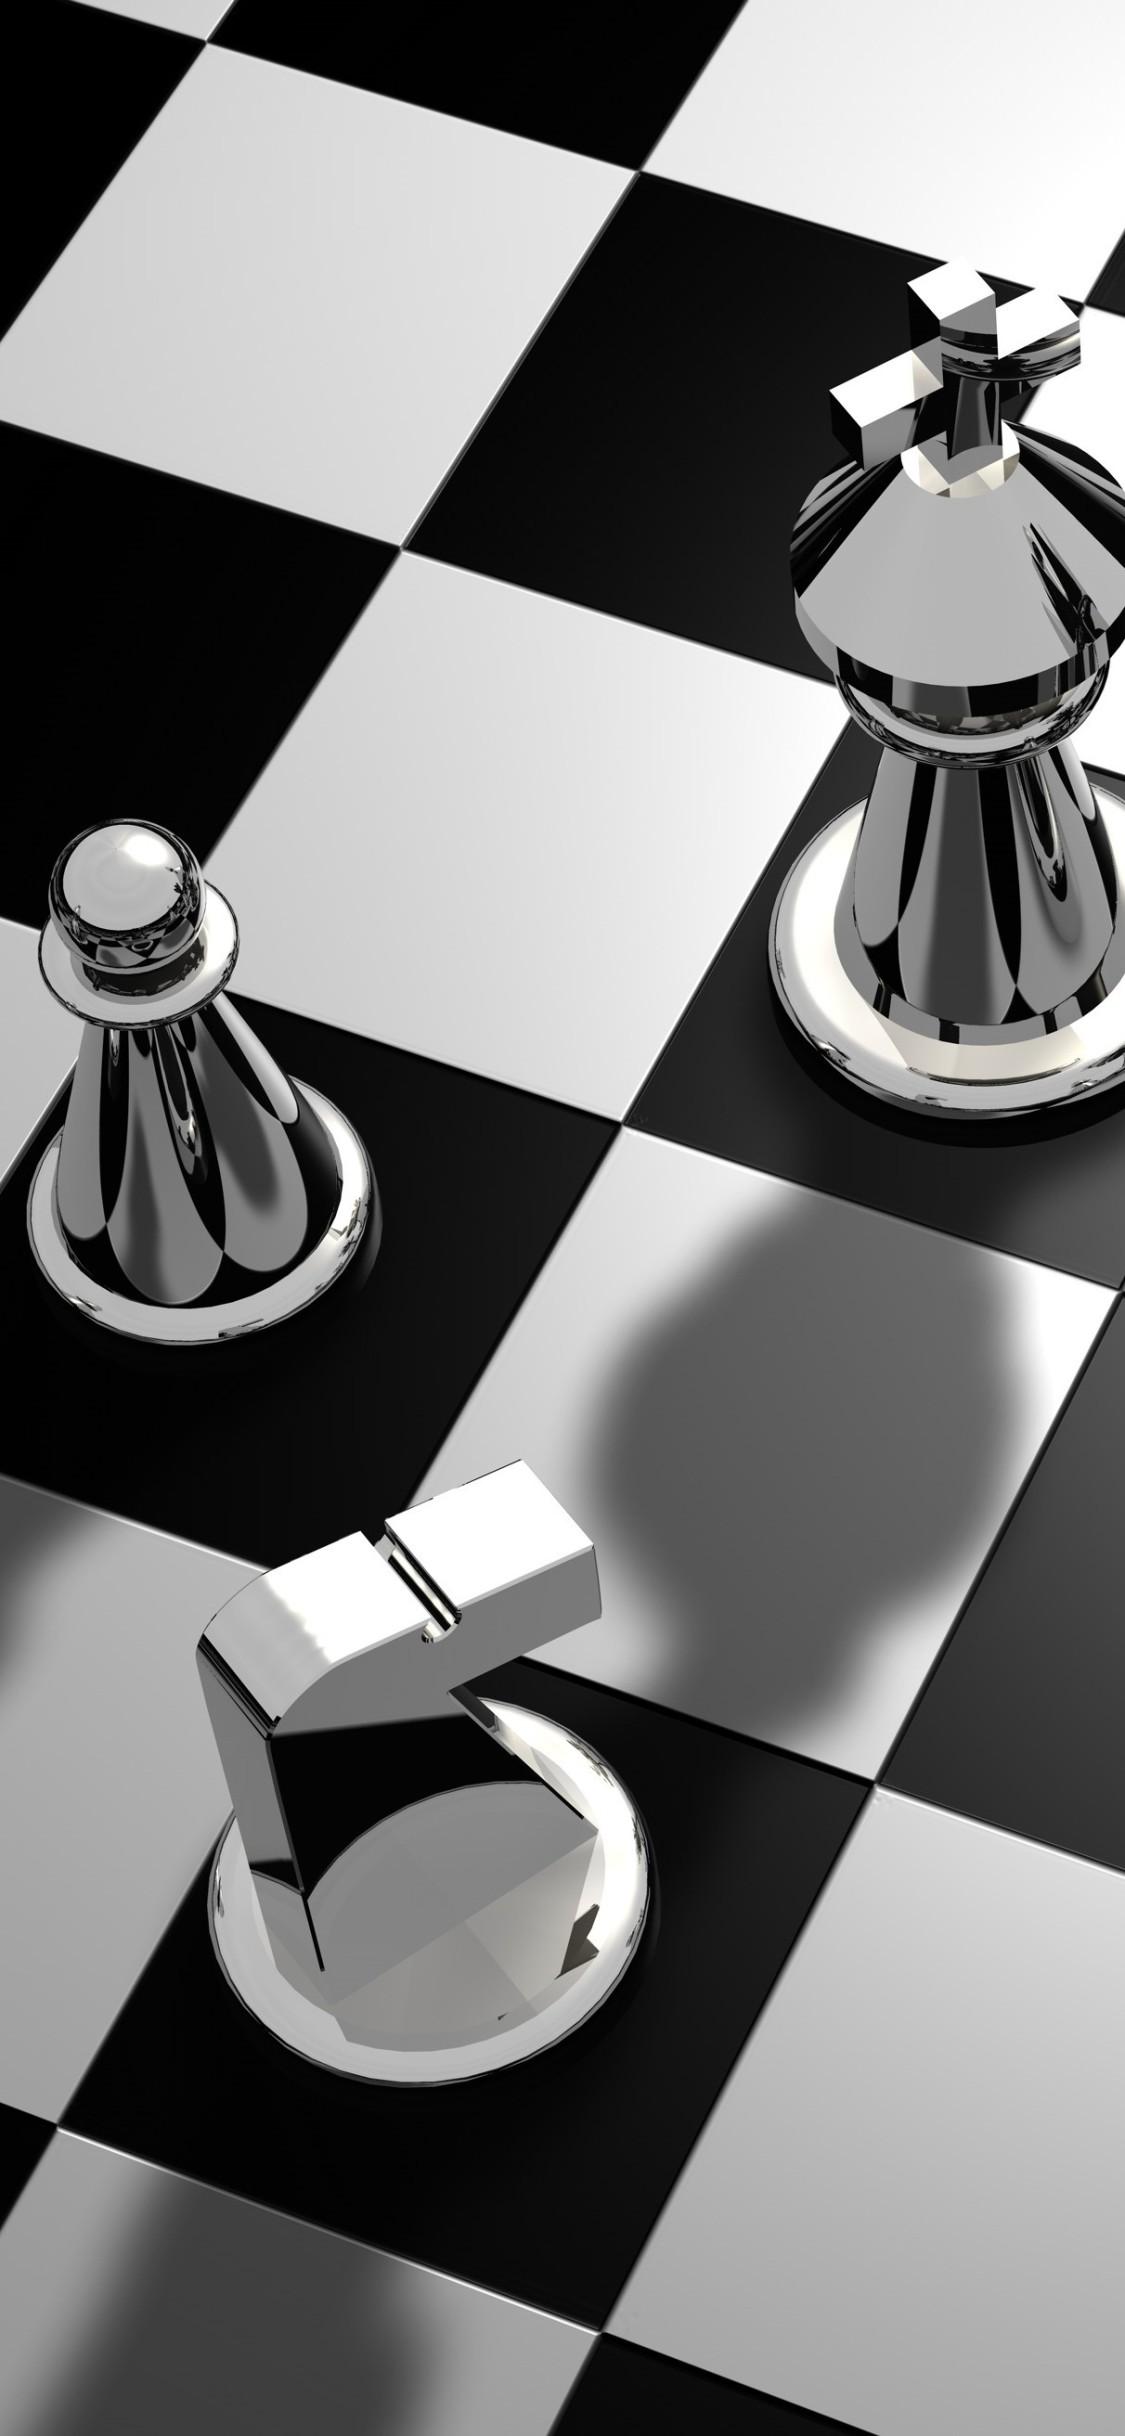 Chess Game IPhone Wallpaper HD - IPhone Wallpapers : iPhone